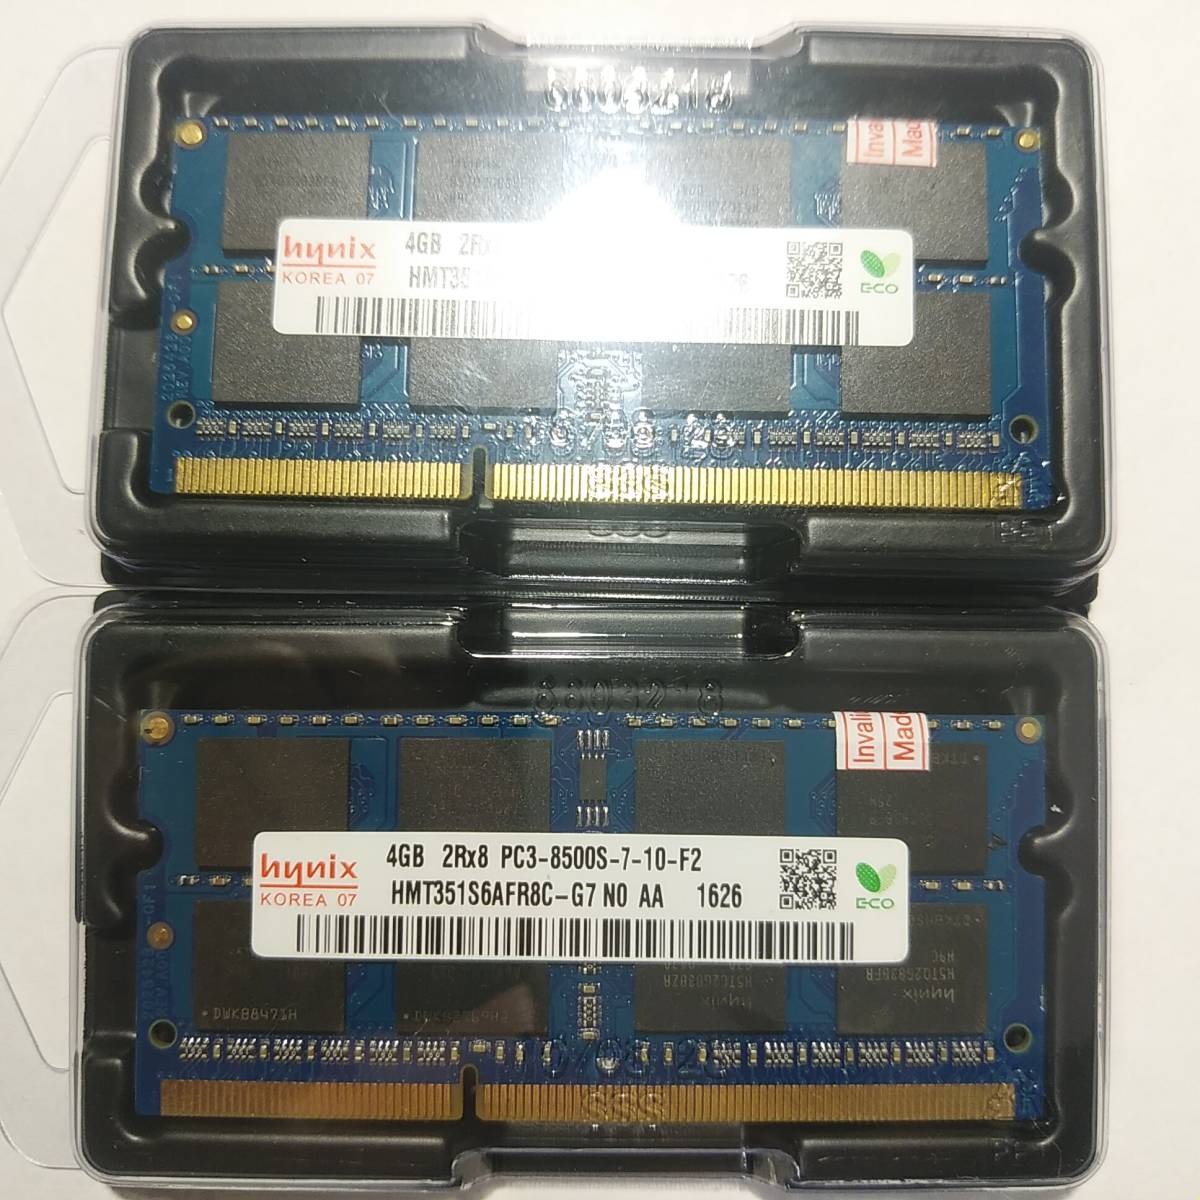  new goods unused Sk-Hynix high nik snow toPC for memory 8GB(4GBx2) 2Rx8 PC3-8500S DDR3-1066 1.5v 204 pin postage 120 jpy ~